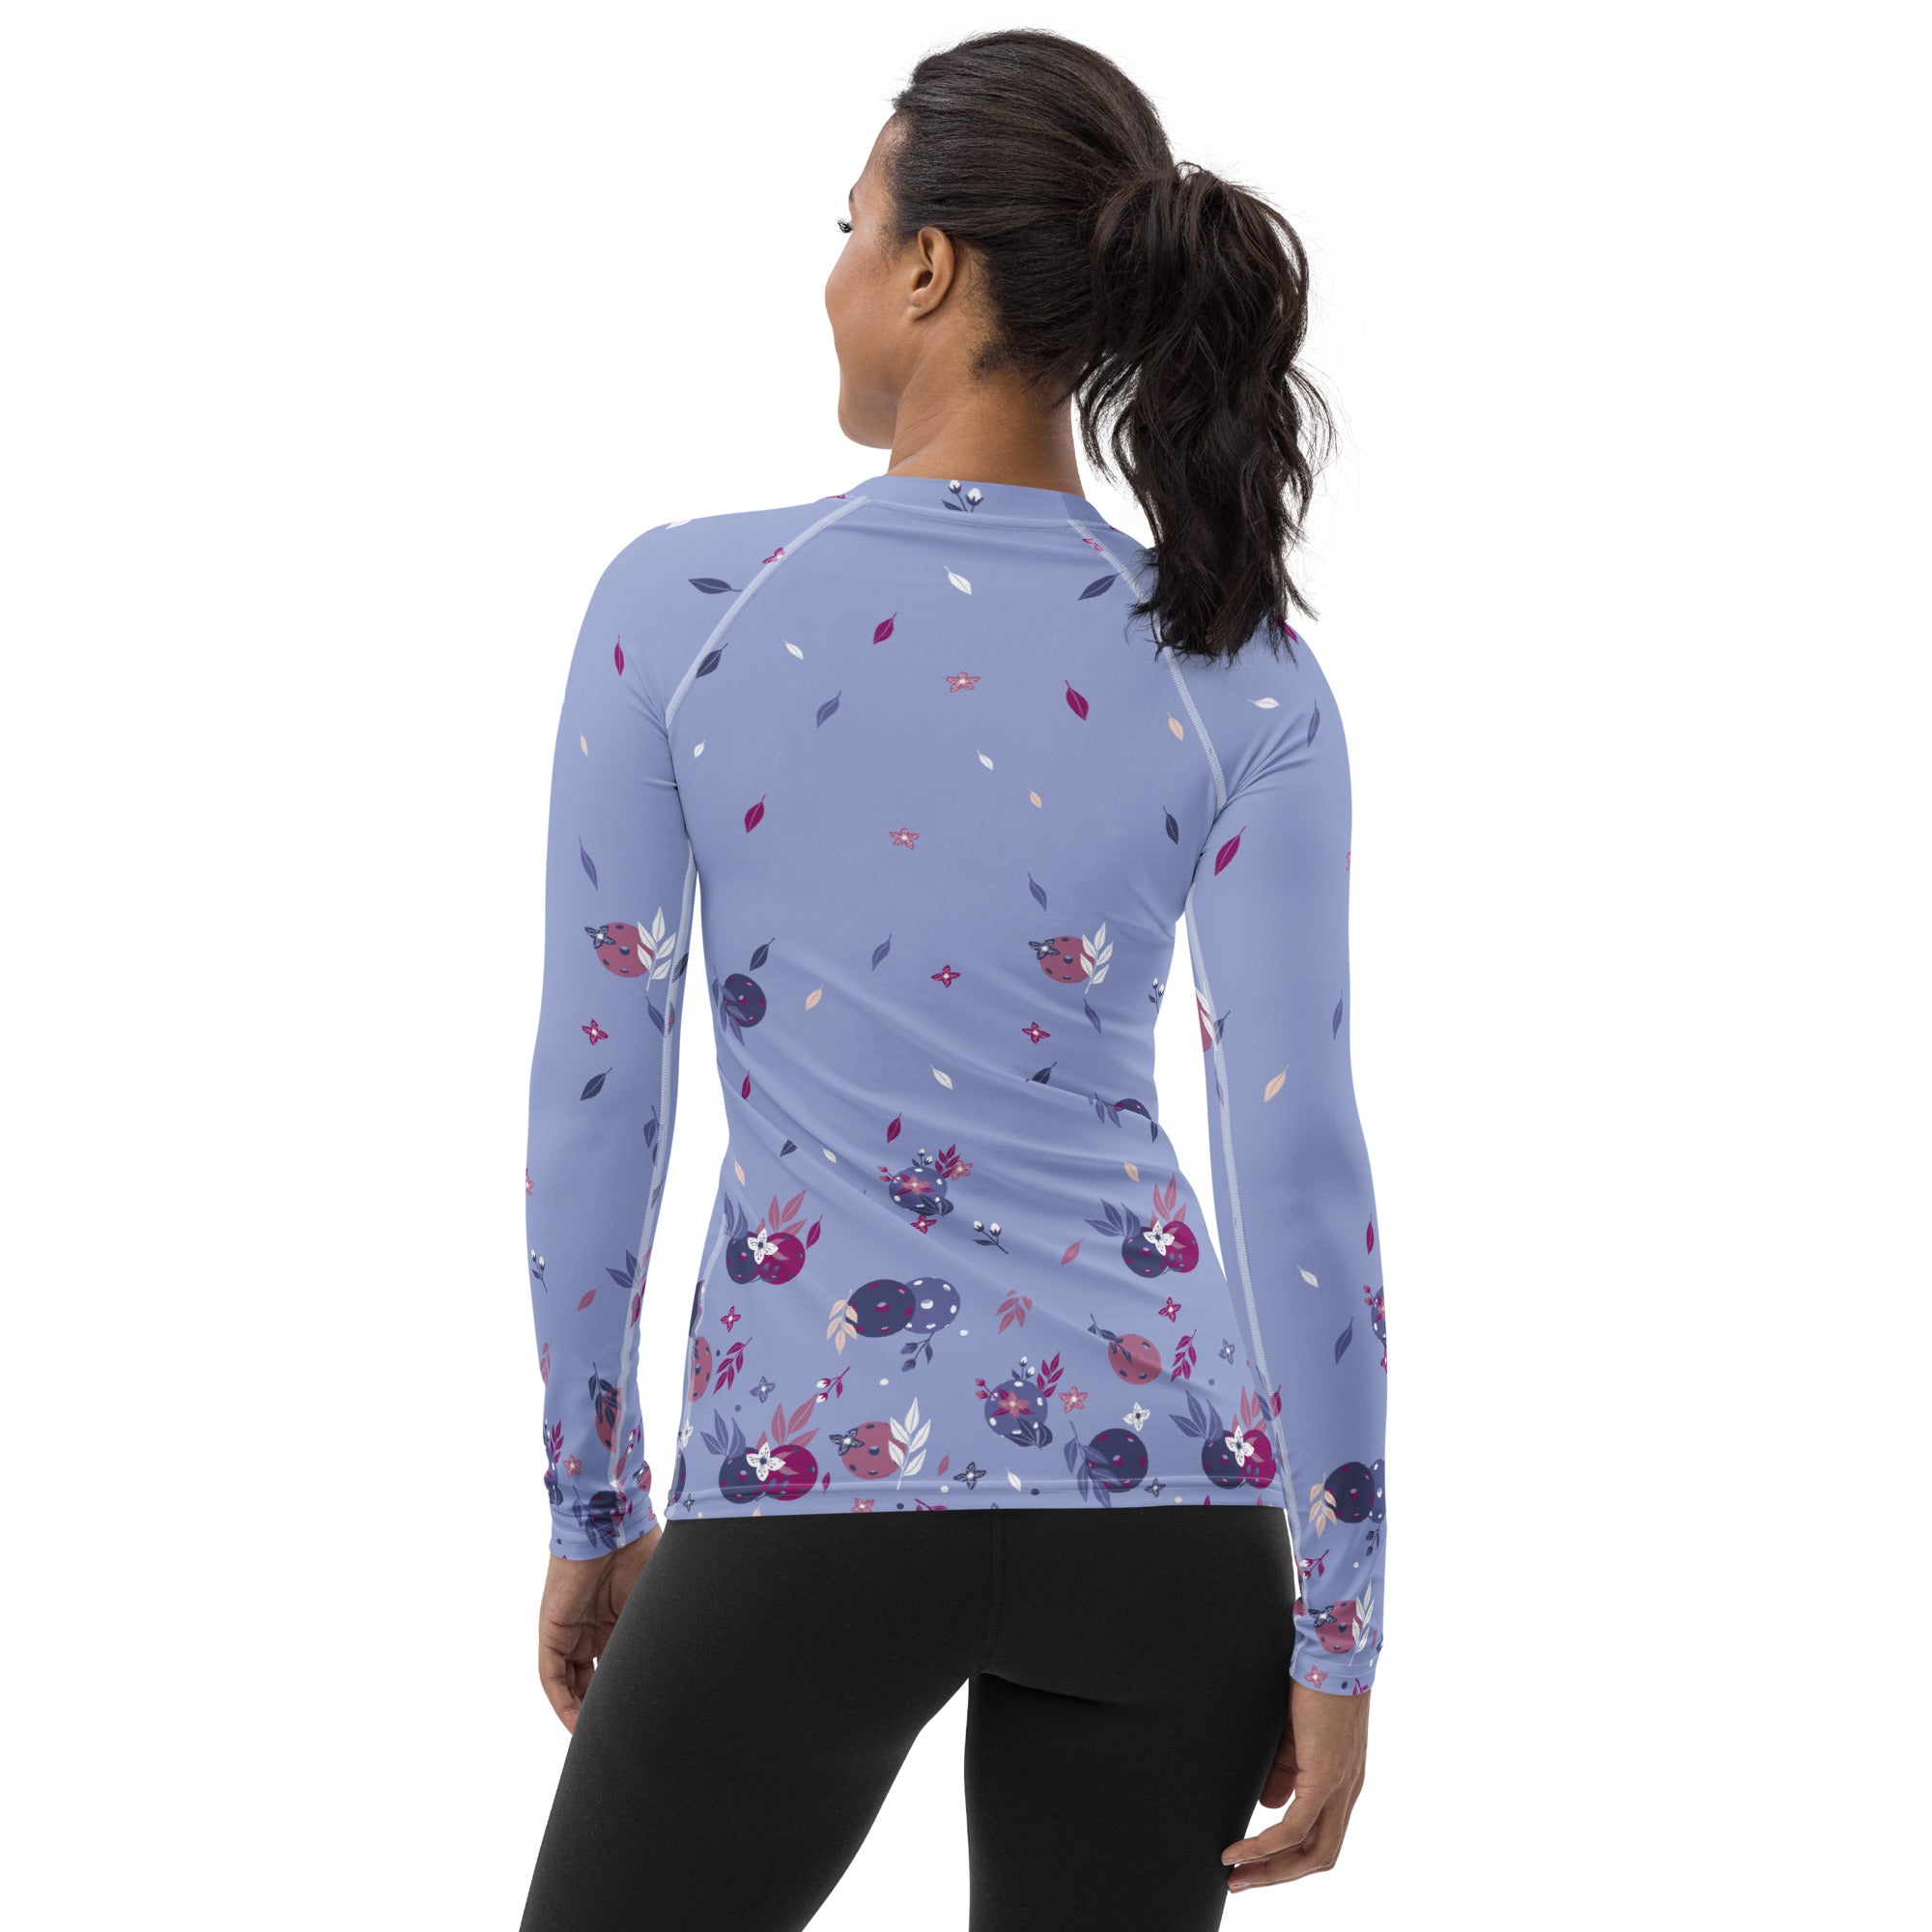 Spring Dink Gradient© Lavender Women's Performance Long Sleeve Shirt for Pickleball Enthusiasts, UPF 50+